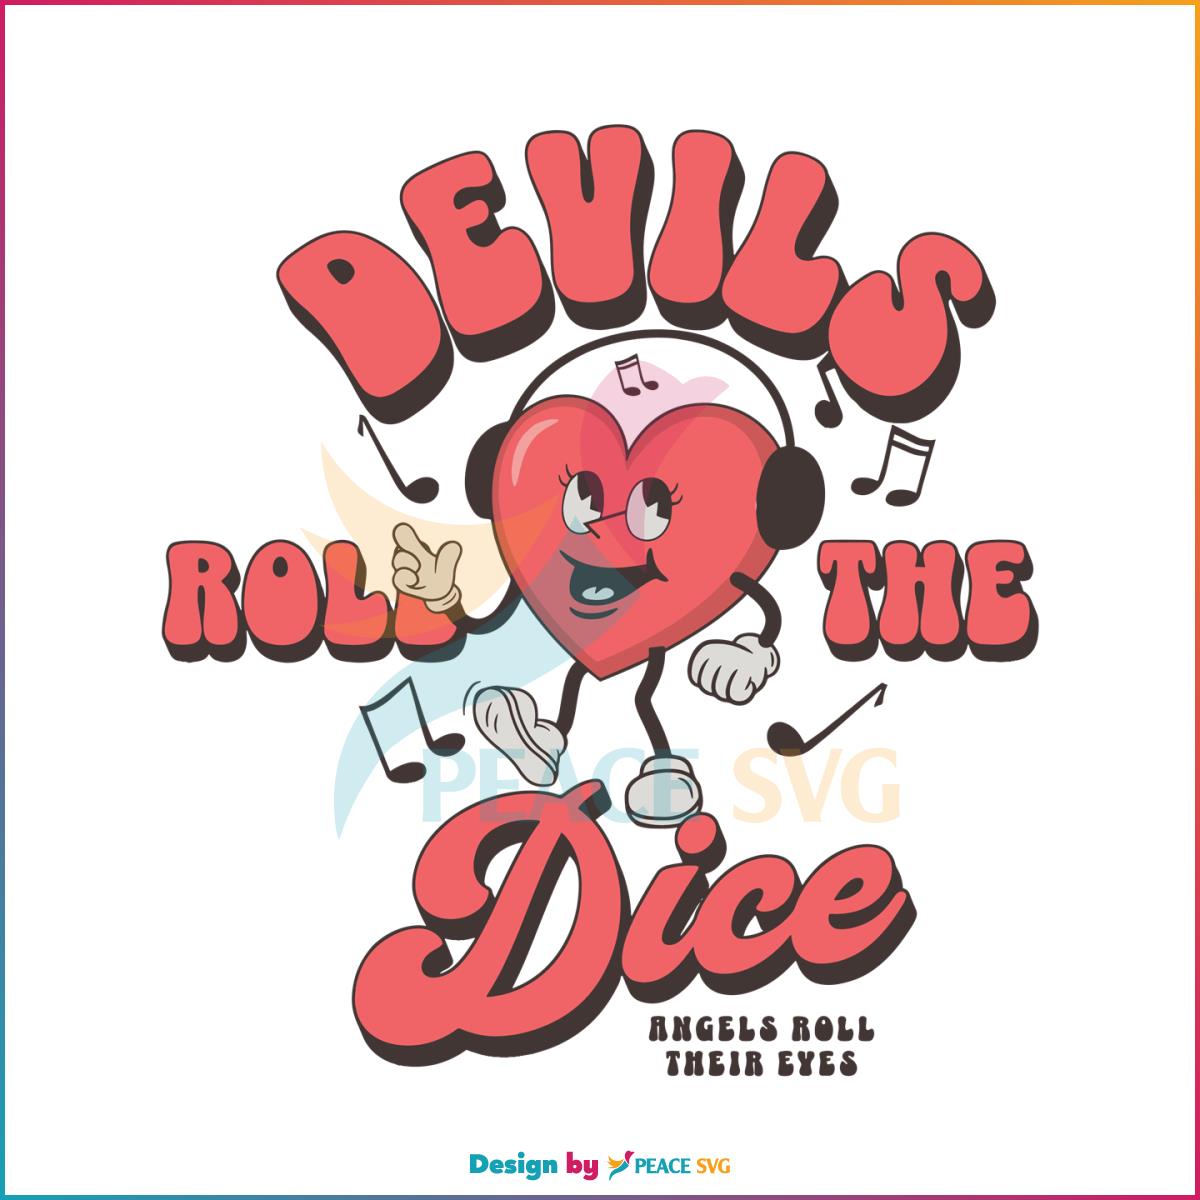 taylor-devils-roll-dice-angels-roll-eyes-svg-cutting-file